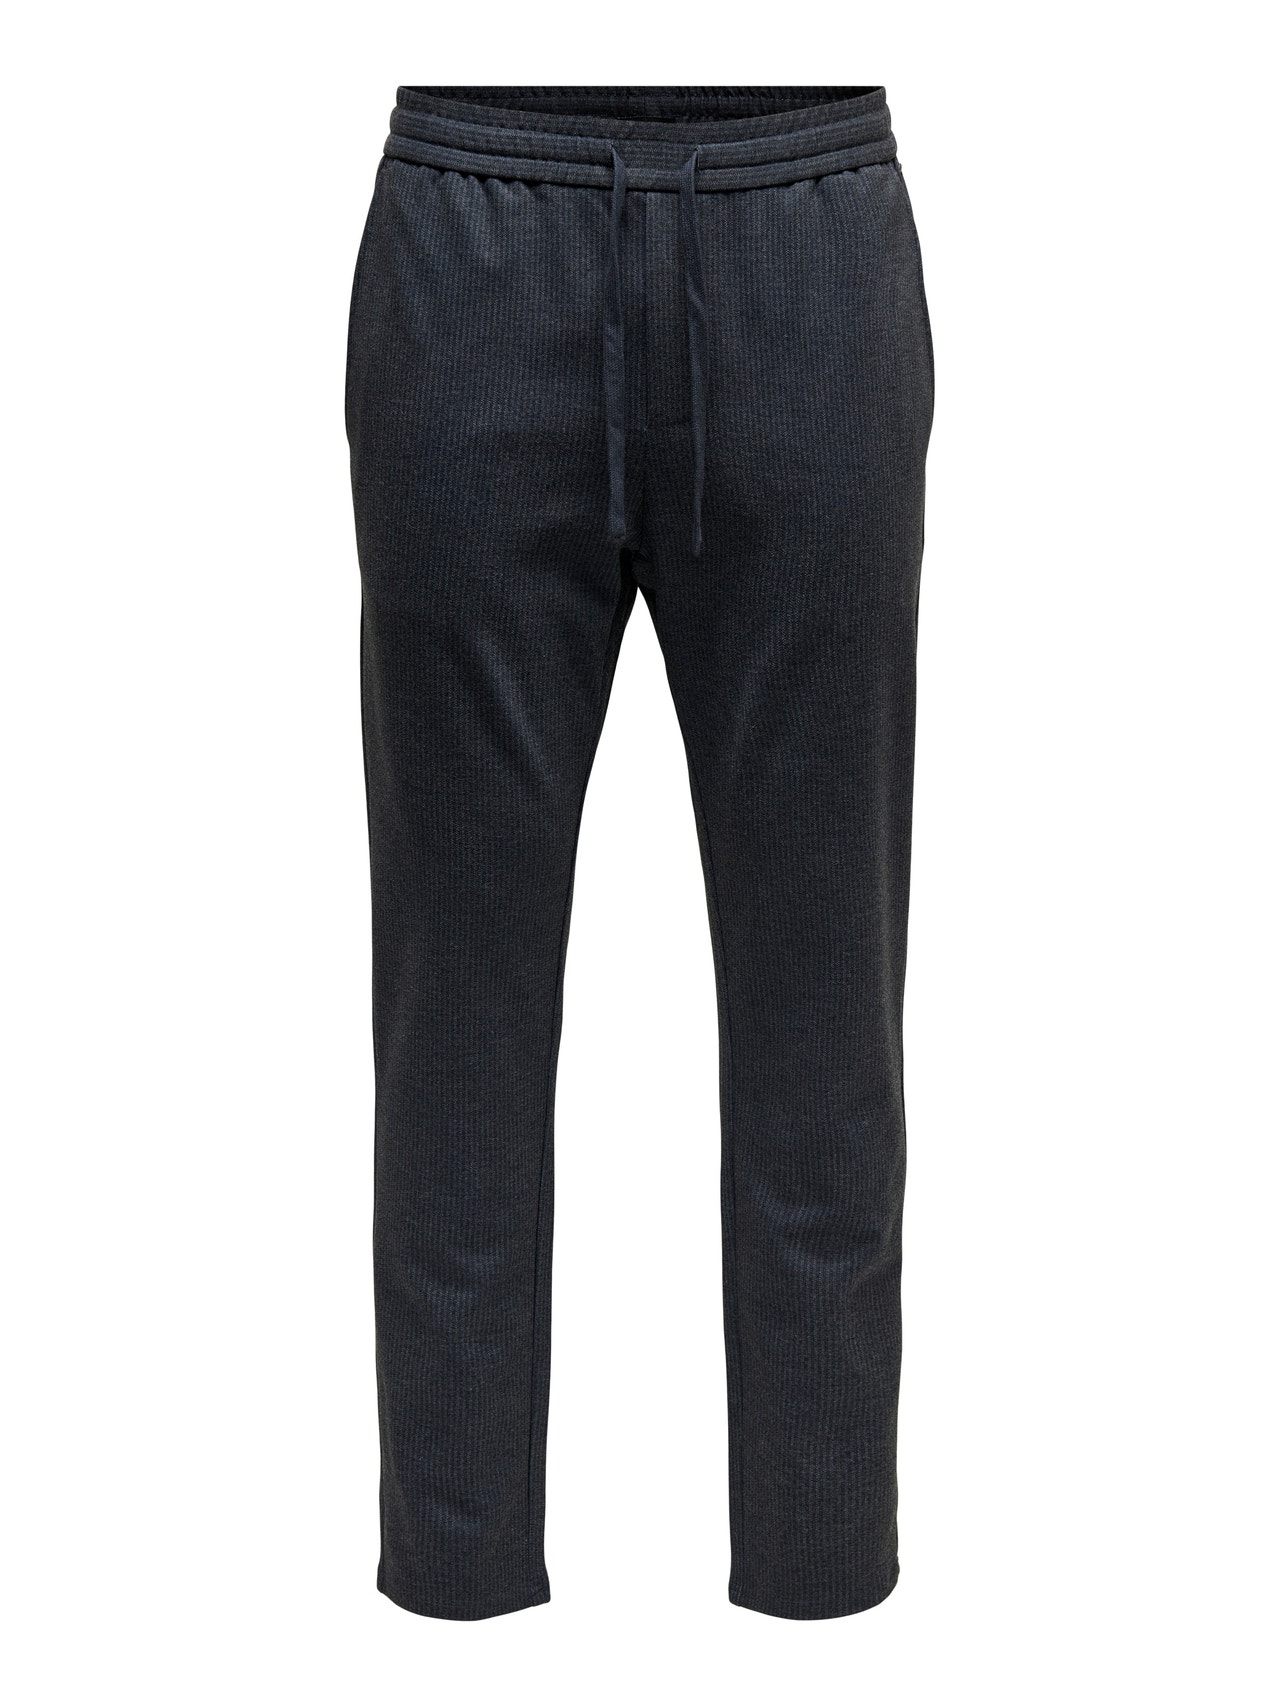 ONLY & SONS Tapered Fit Chinos -Dark Navy - 22023492